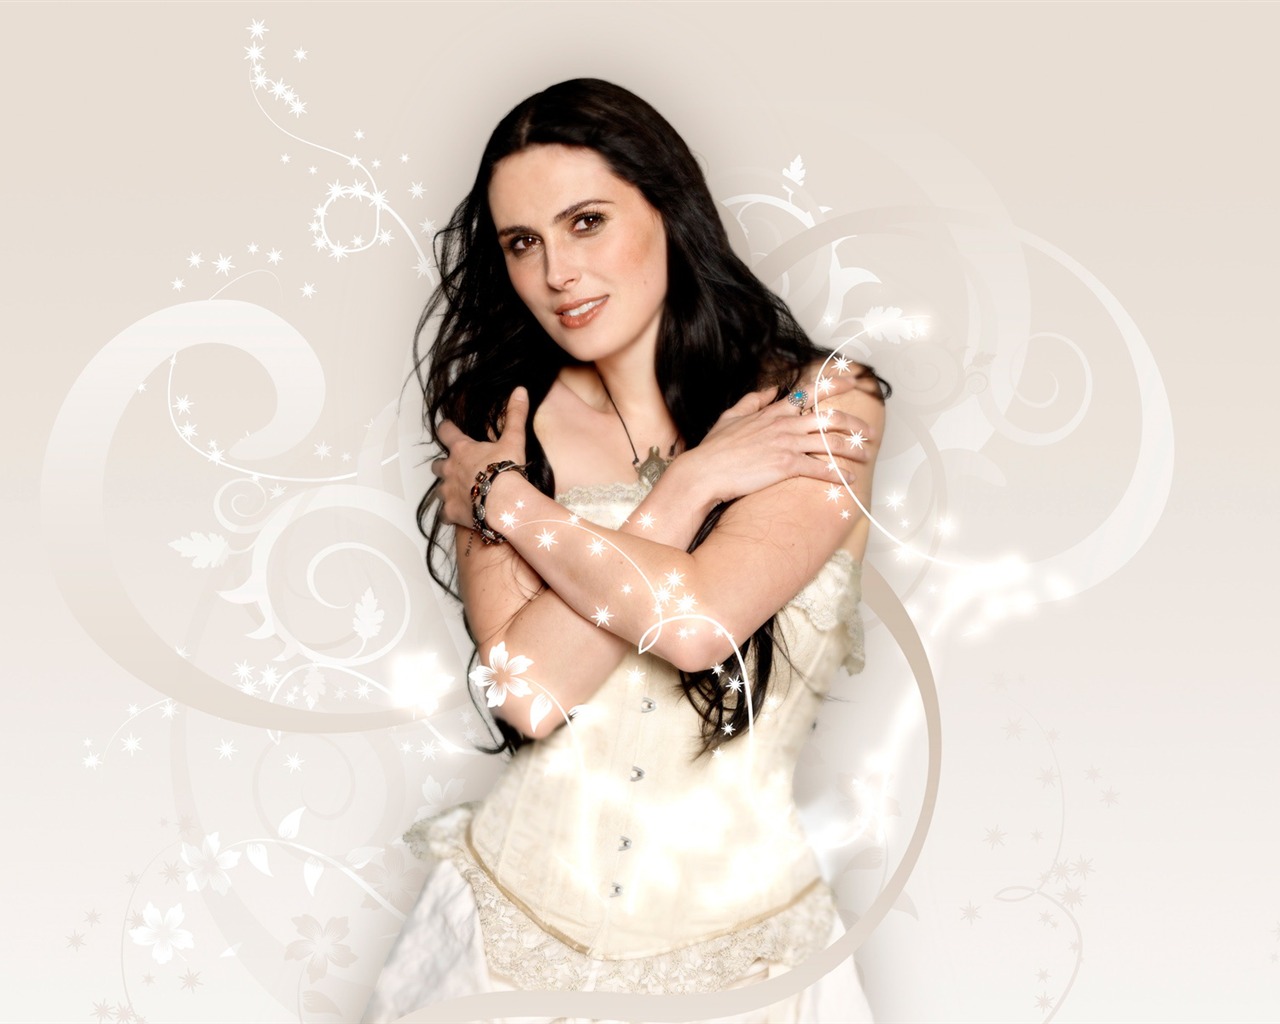 Sharon den Adel #002 - 1280x1024 Wallpapers Pictures Photos Images